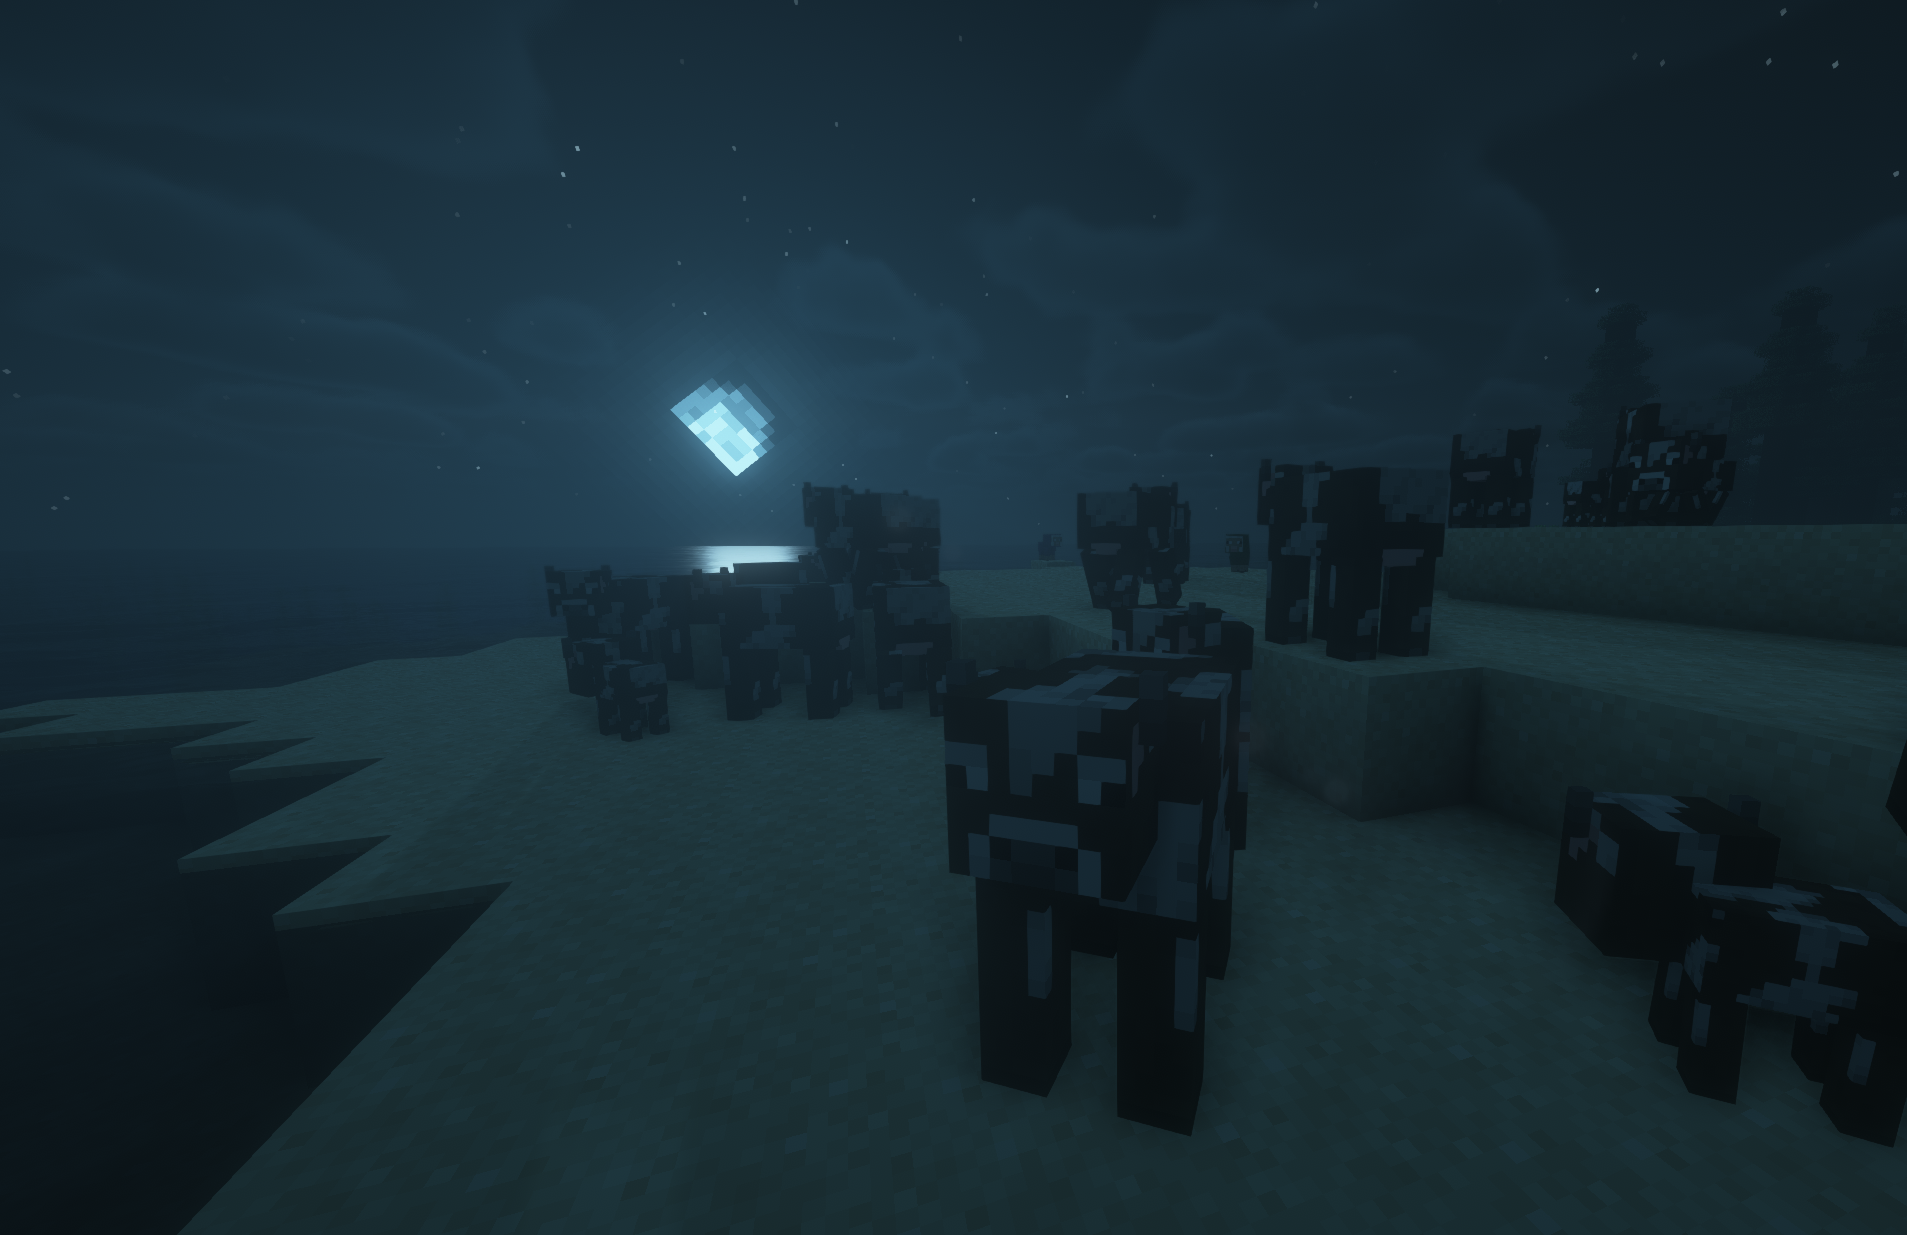 Picture taken in Dethemium.minehut.gg at a small island at -12602.74, 63.00, -19584.21